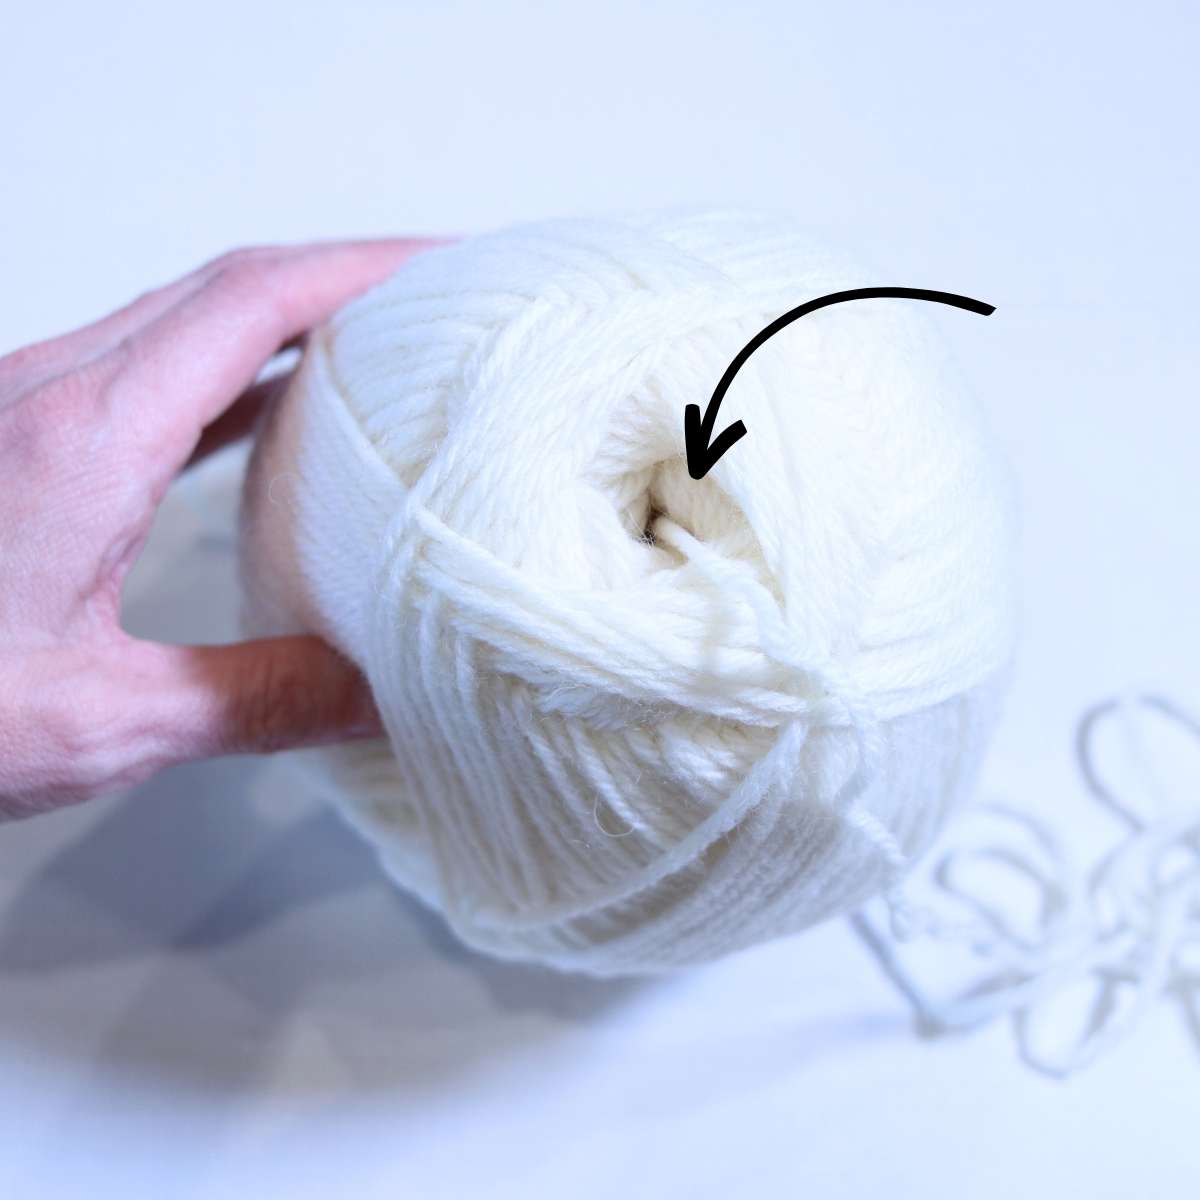 A womans hand is holding a skein of cream colored yarn towards the camera to demonstrate where to pull the yarn from when making DIY wool dryer balls. A black arrow is pointing to the center of the yarn ball.